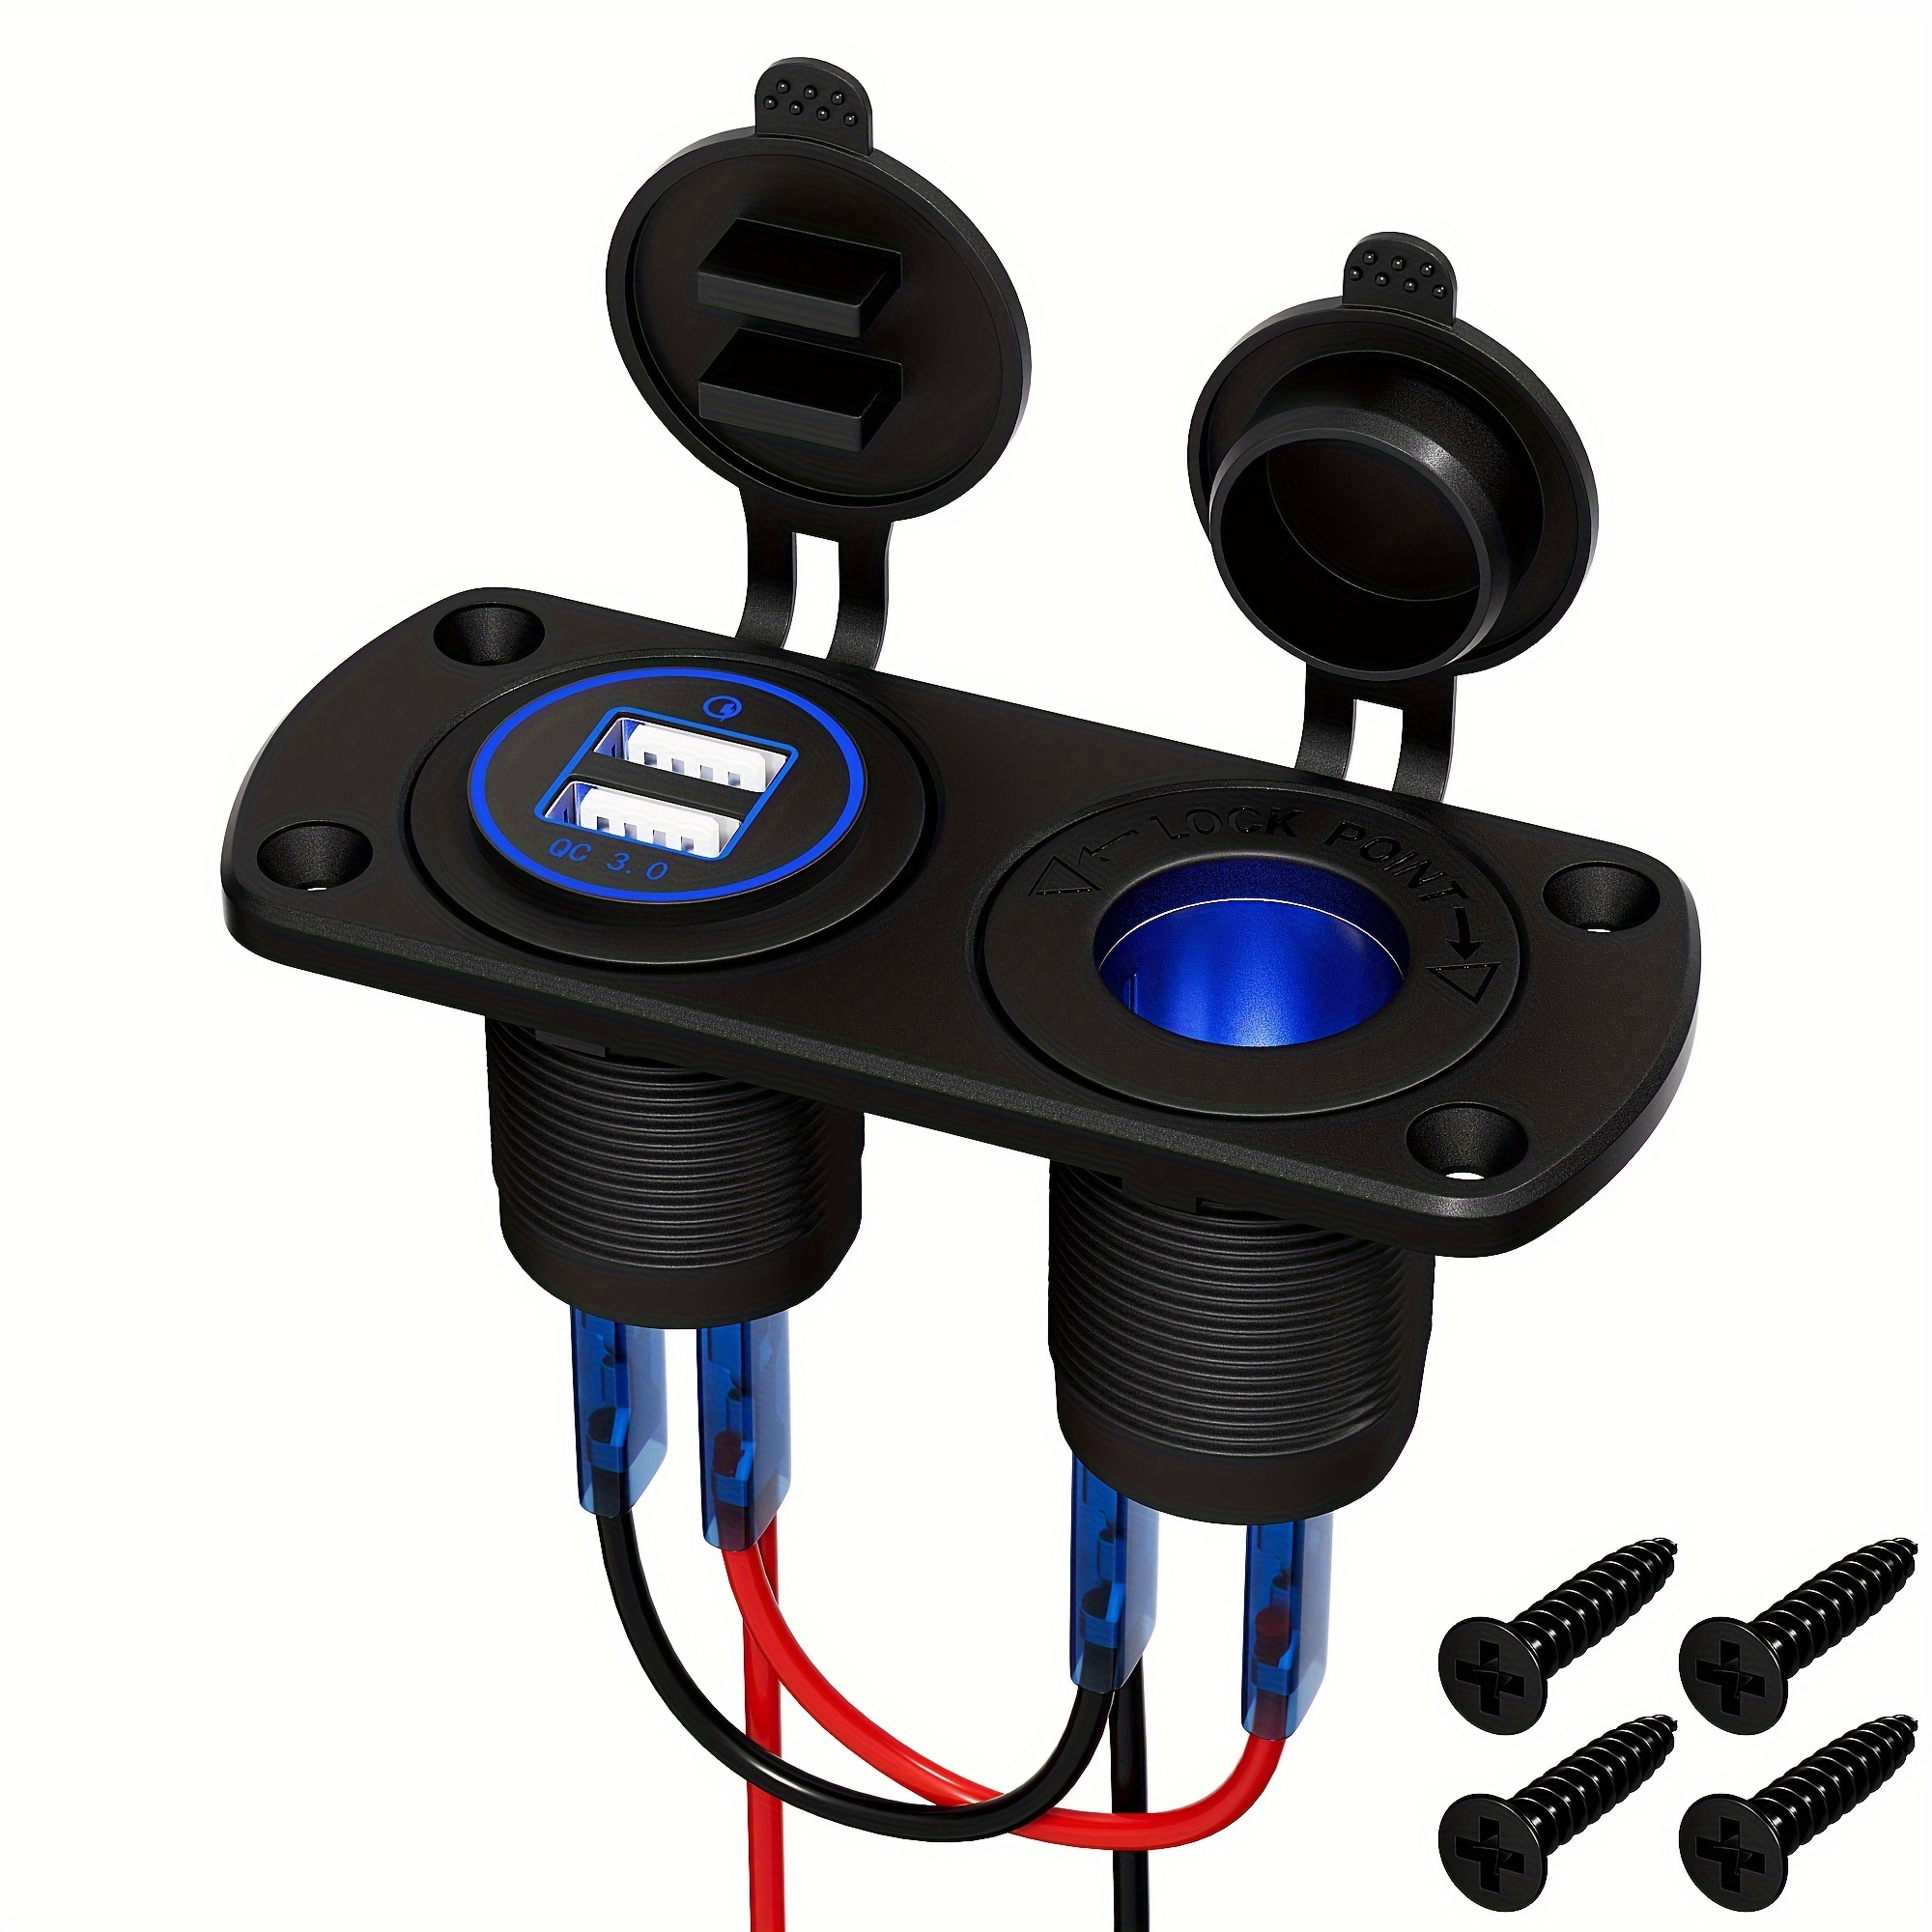 12V/24V Car Boat Marine Motorcycle Dual USB Charger Socket Power Outlet 1A  &2.1A (3.1A) for RV Truck Camper Vehicles - China Car Charger, 12V USB  Charger